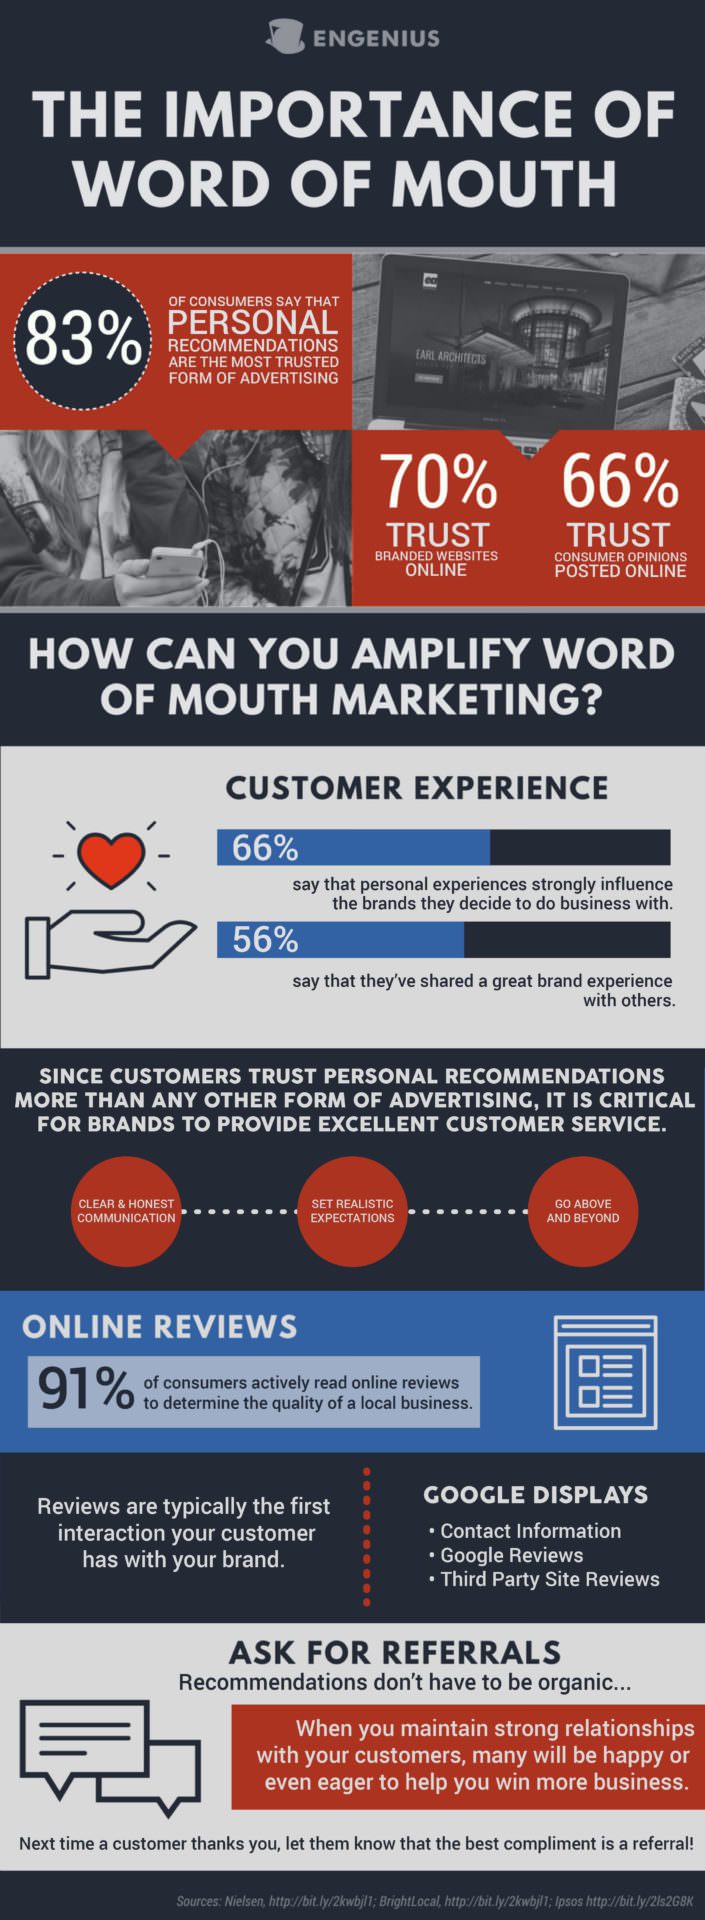 Infographic on how to amplify your word of mouth marketing